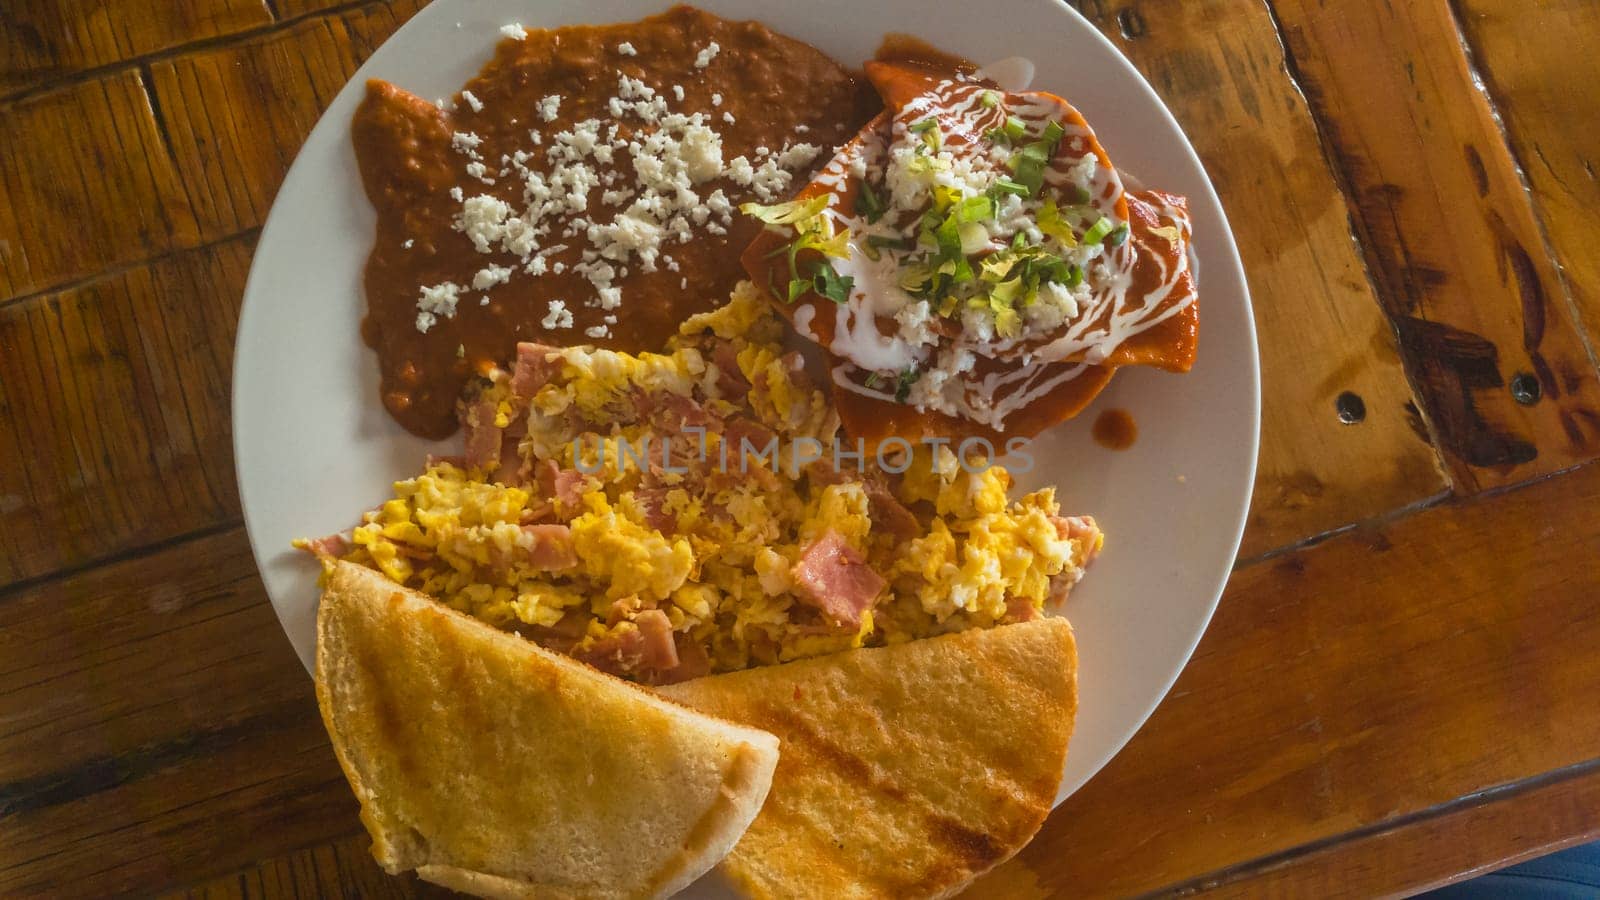 Chilaquiles and Refried Beans, Traditional Mexican Breakfast by RobertPB